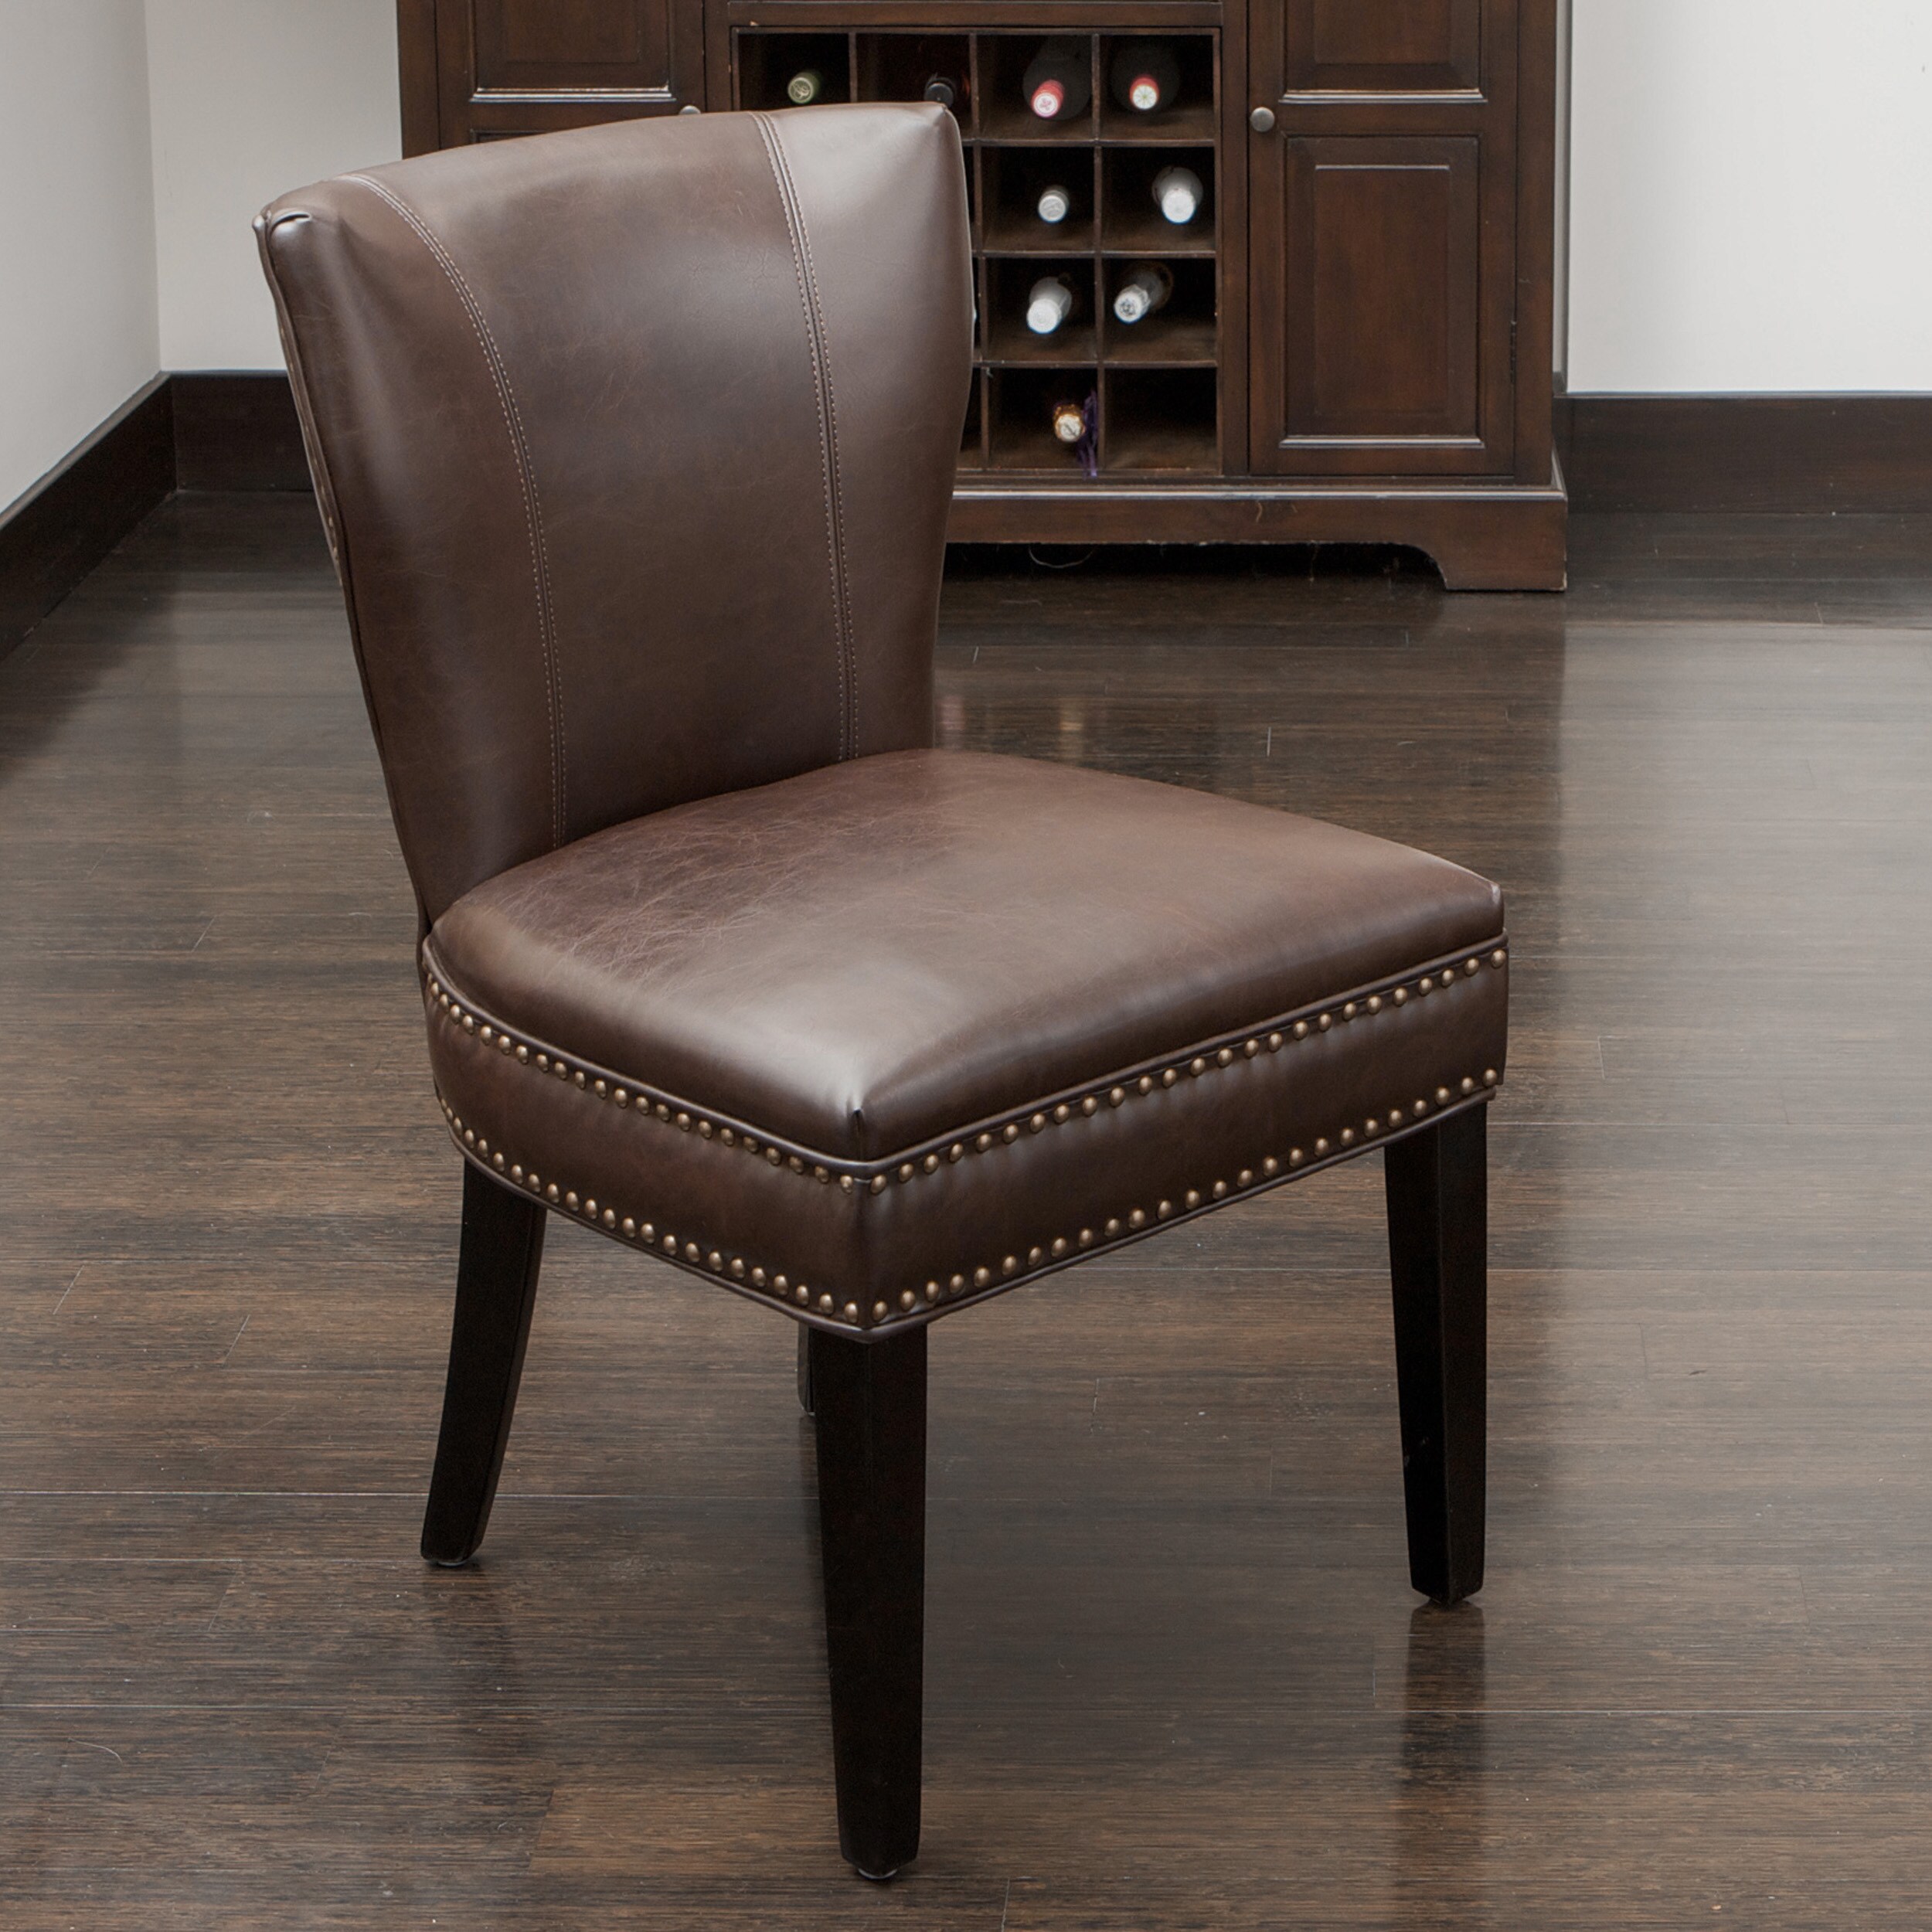 Accent Dining Chair Today $139.99 Sale $125.99 Save 10%